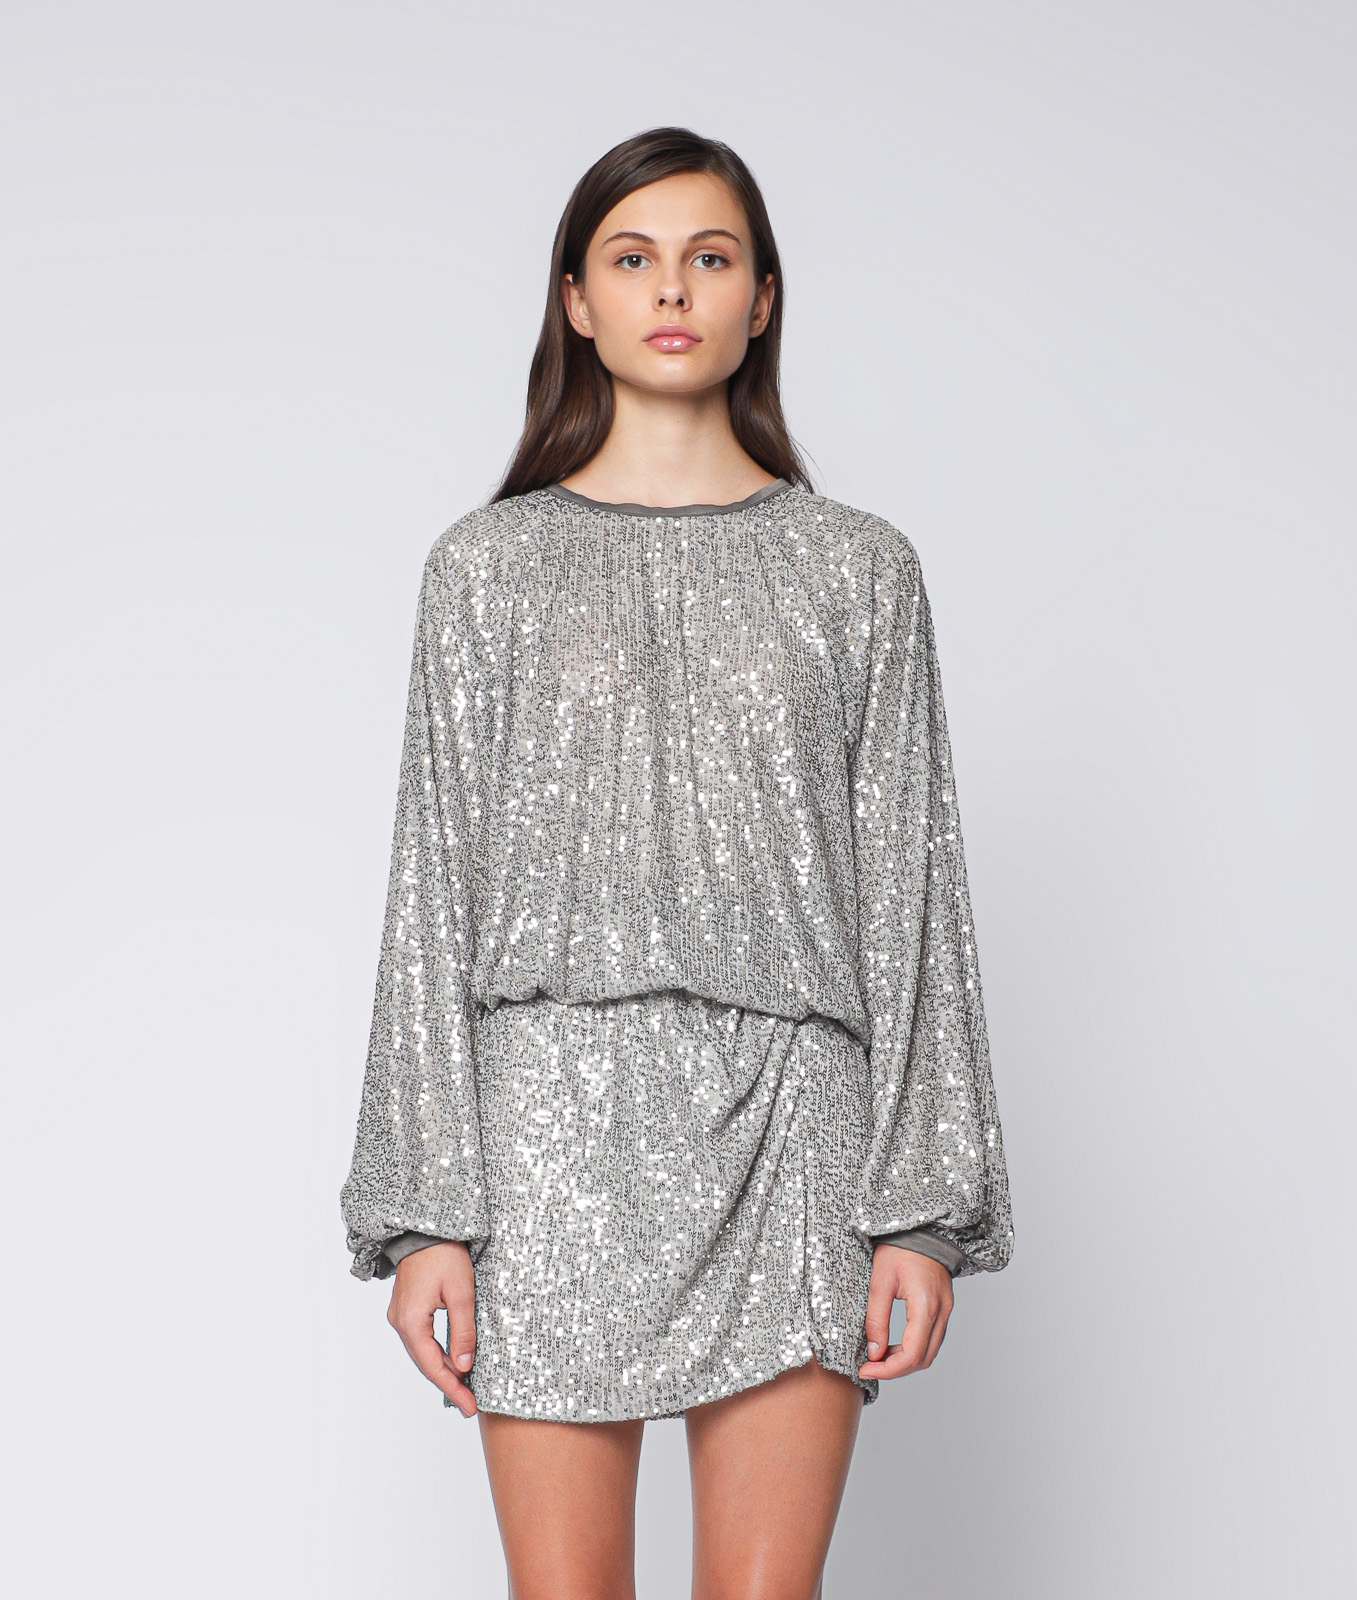 Camille Silver Sequin Top